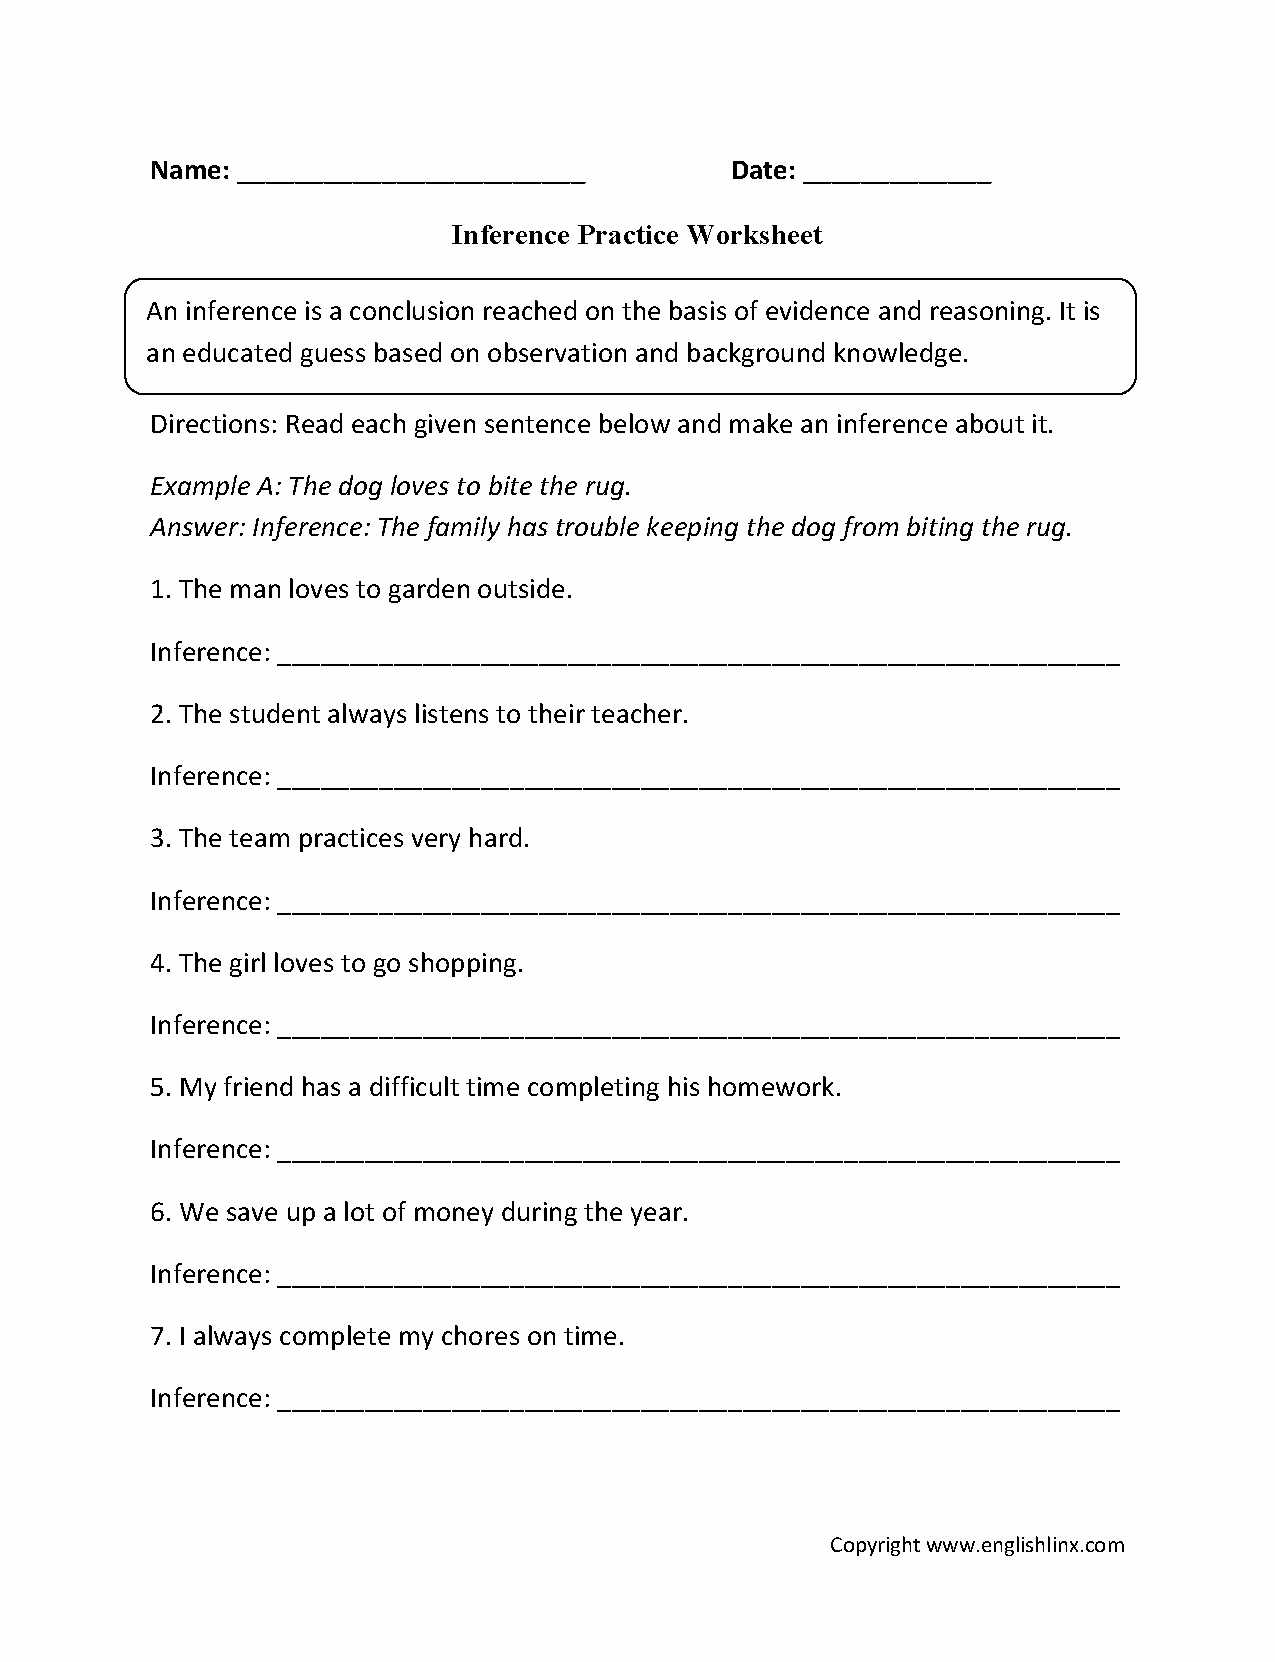 Act English Practice Worksheets Pdf and Free 7th Grade Science Worksheets 7rd Grade Free